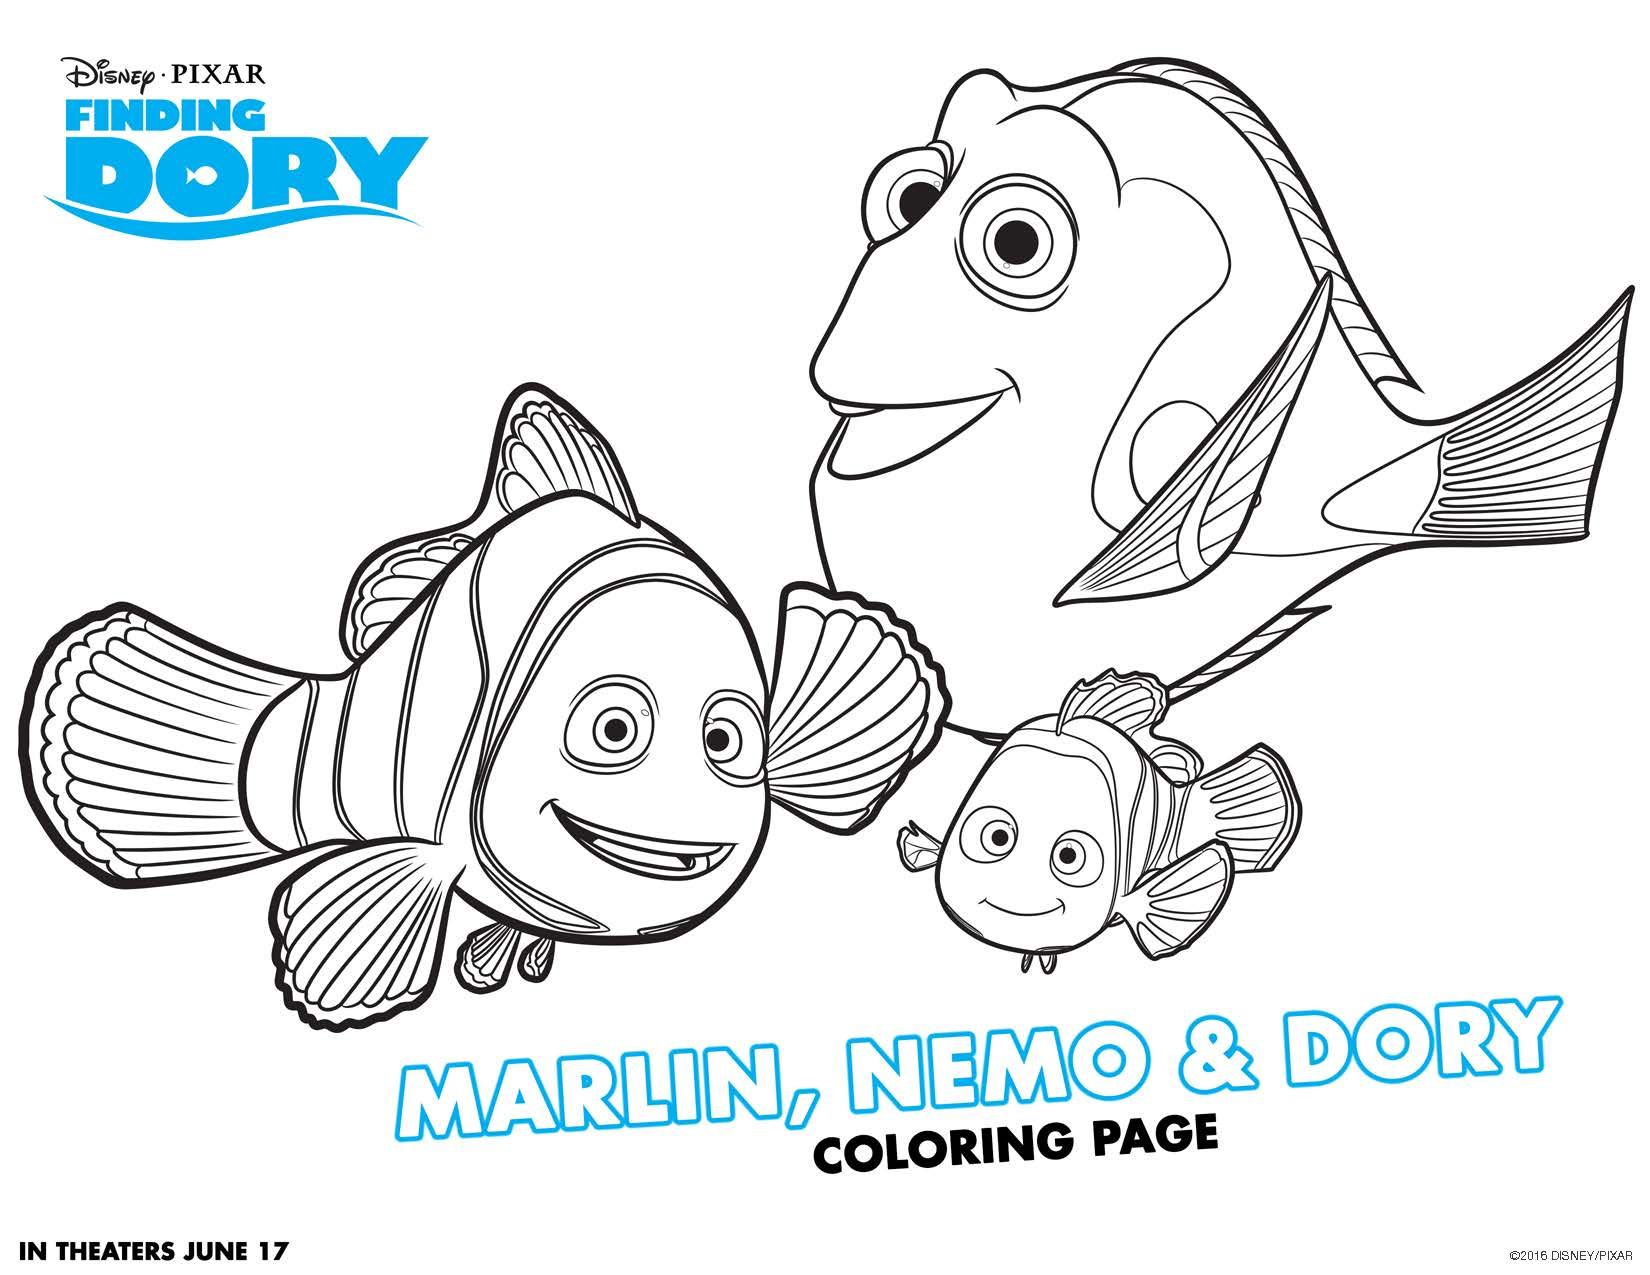 Crayola Fish Coloring Pages Coloring Pages Stunning Finding Dory Coloring Book Crayola Images